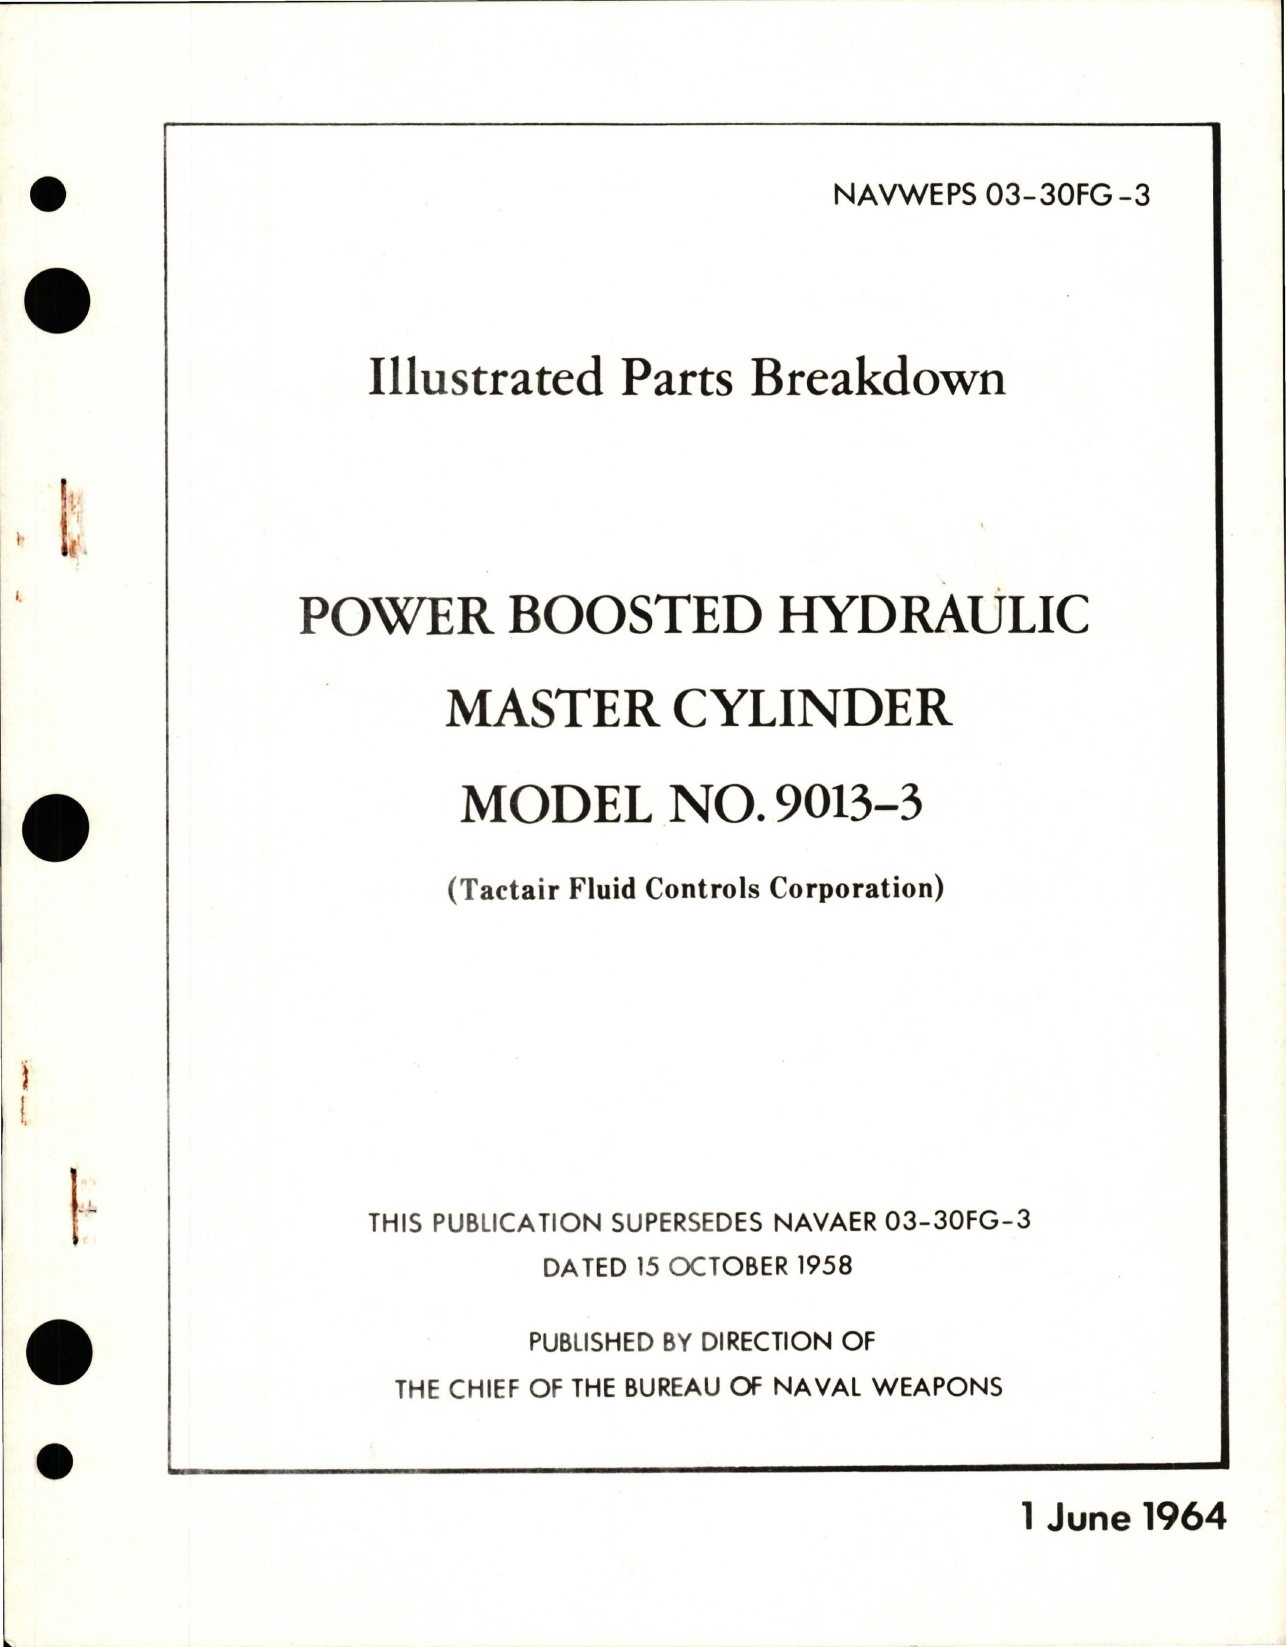 Sample page 1 from AirCorps Library document: Illustrated Parts Breakdown for Power Boosted Hydraulic Master Cylinder - Model 9013-3